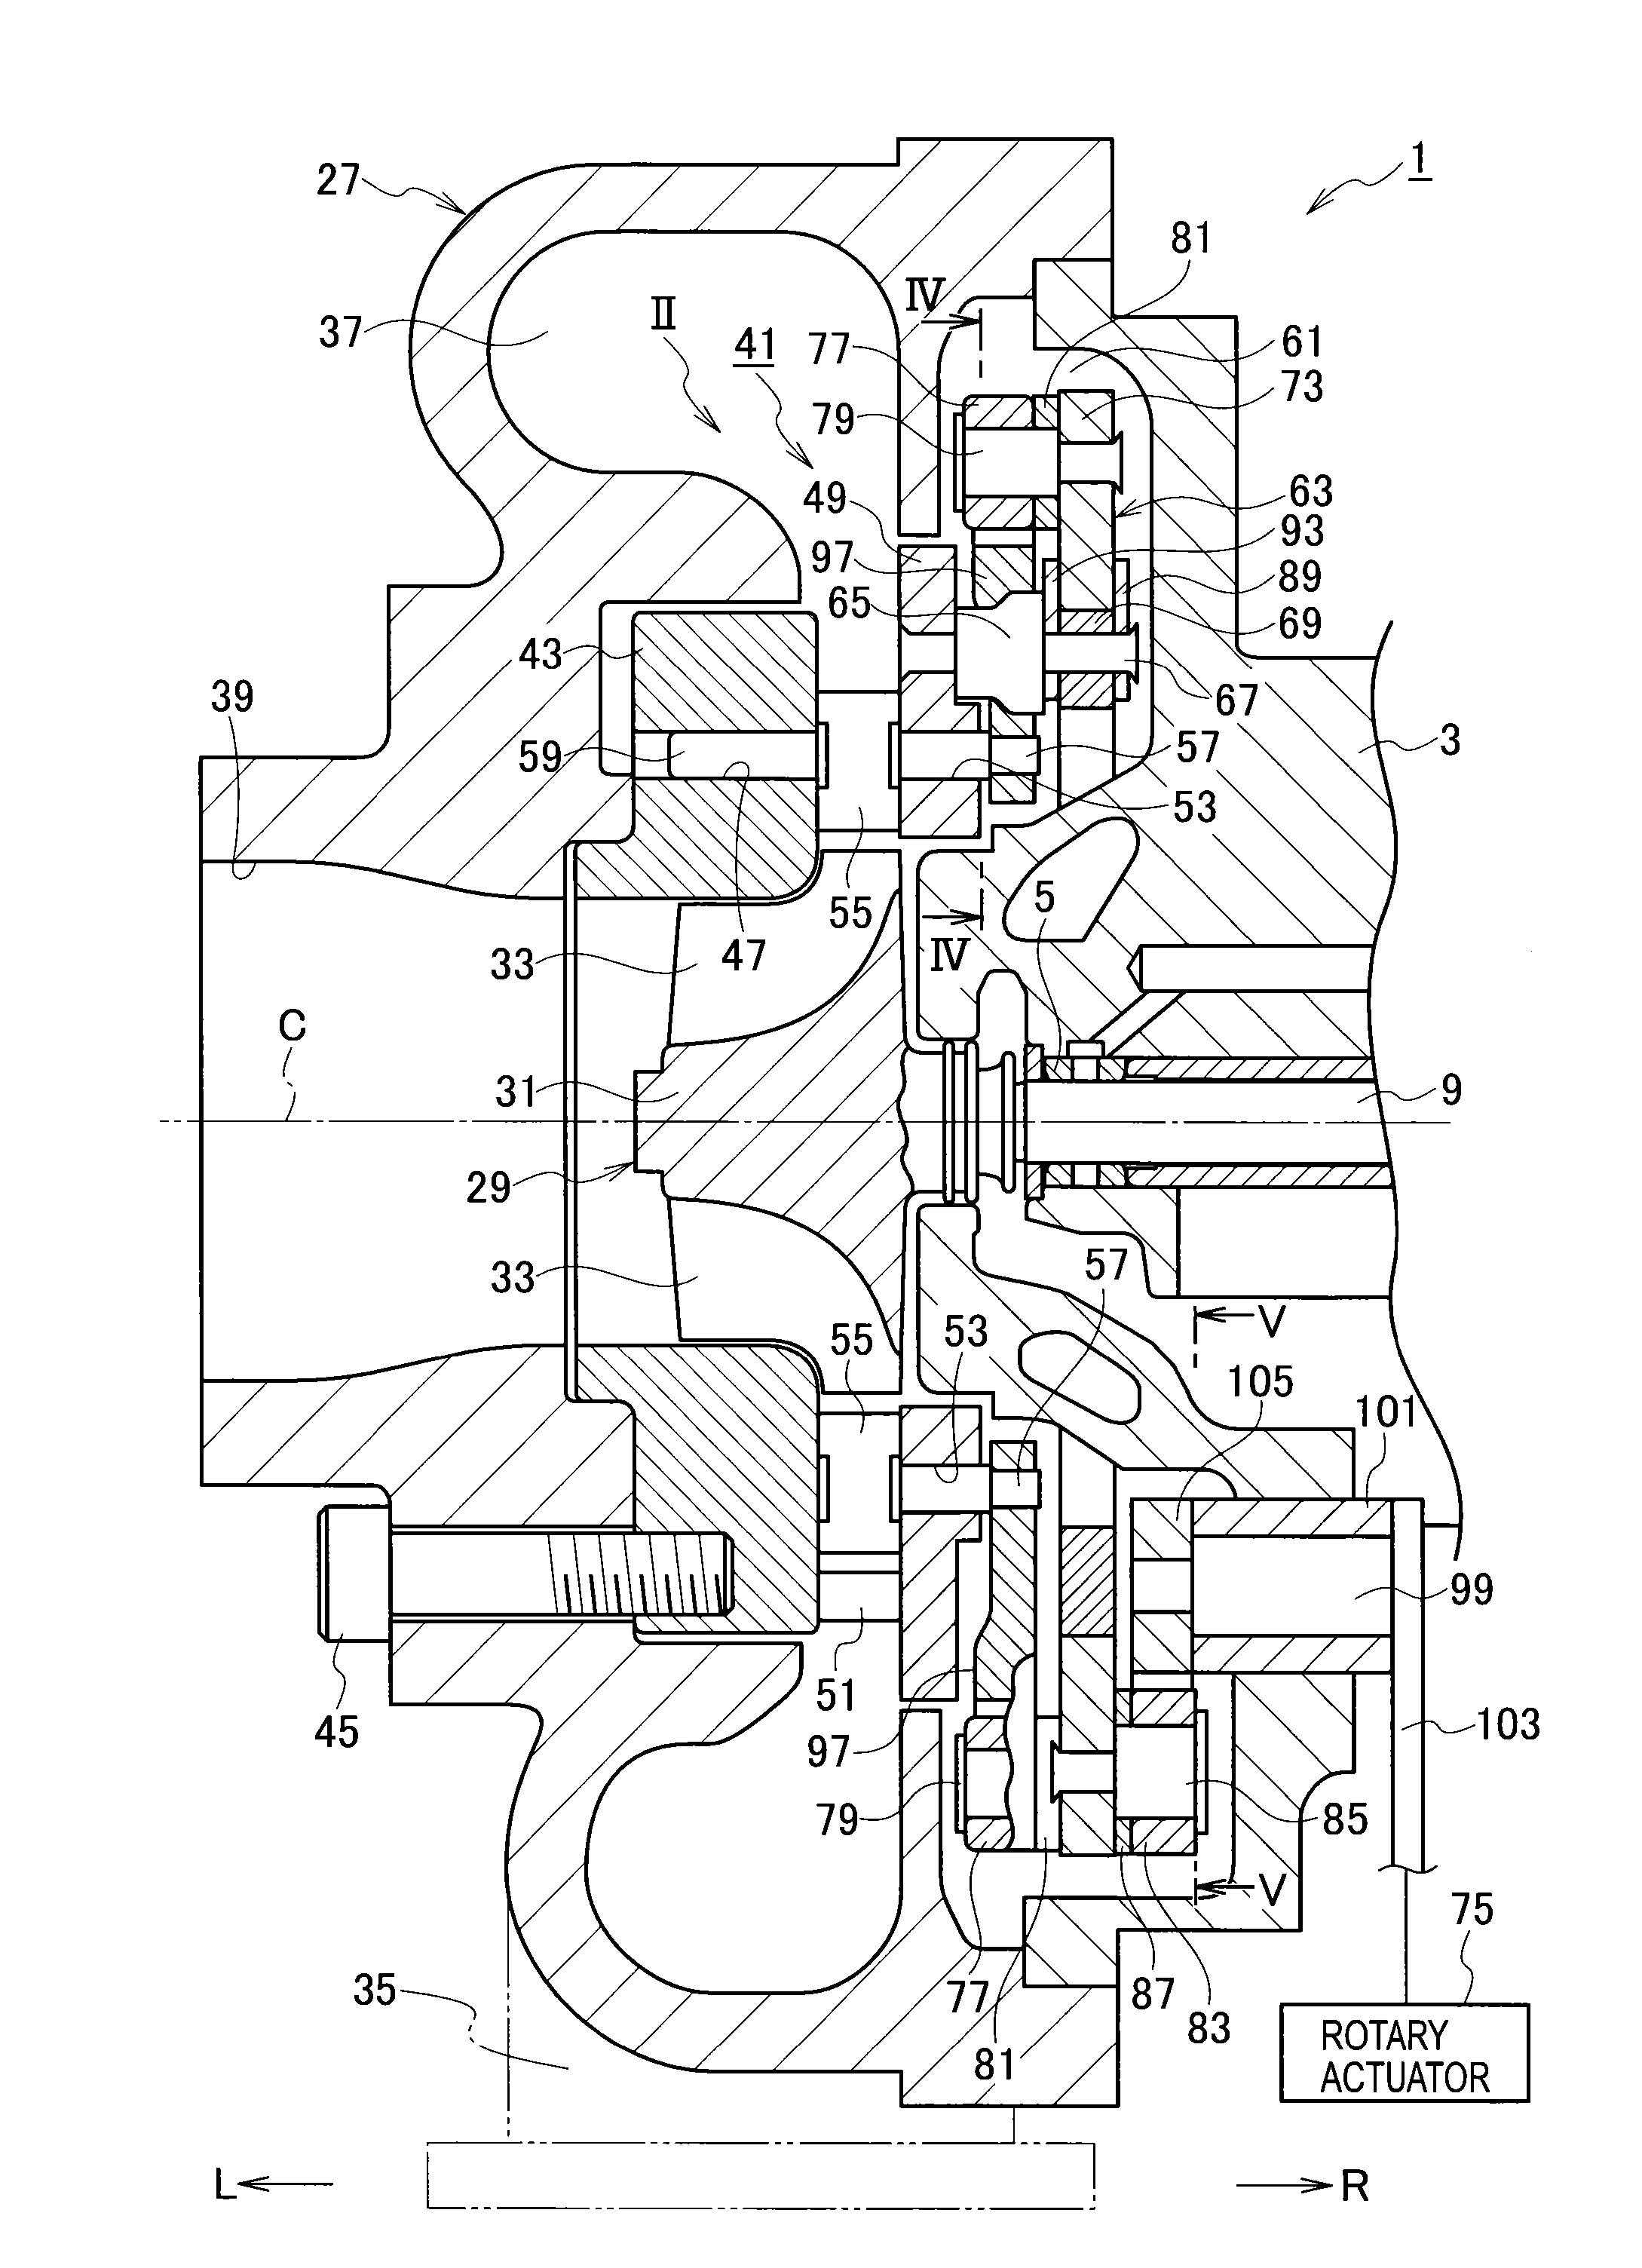 Variable nozzle unit and variable geometry system turbocharger